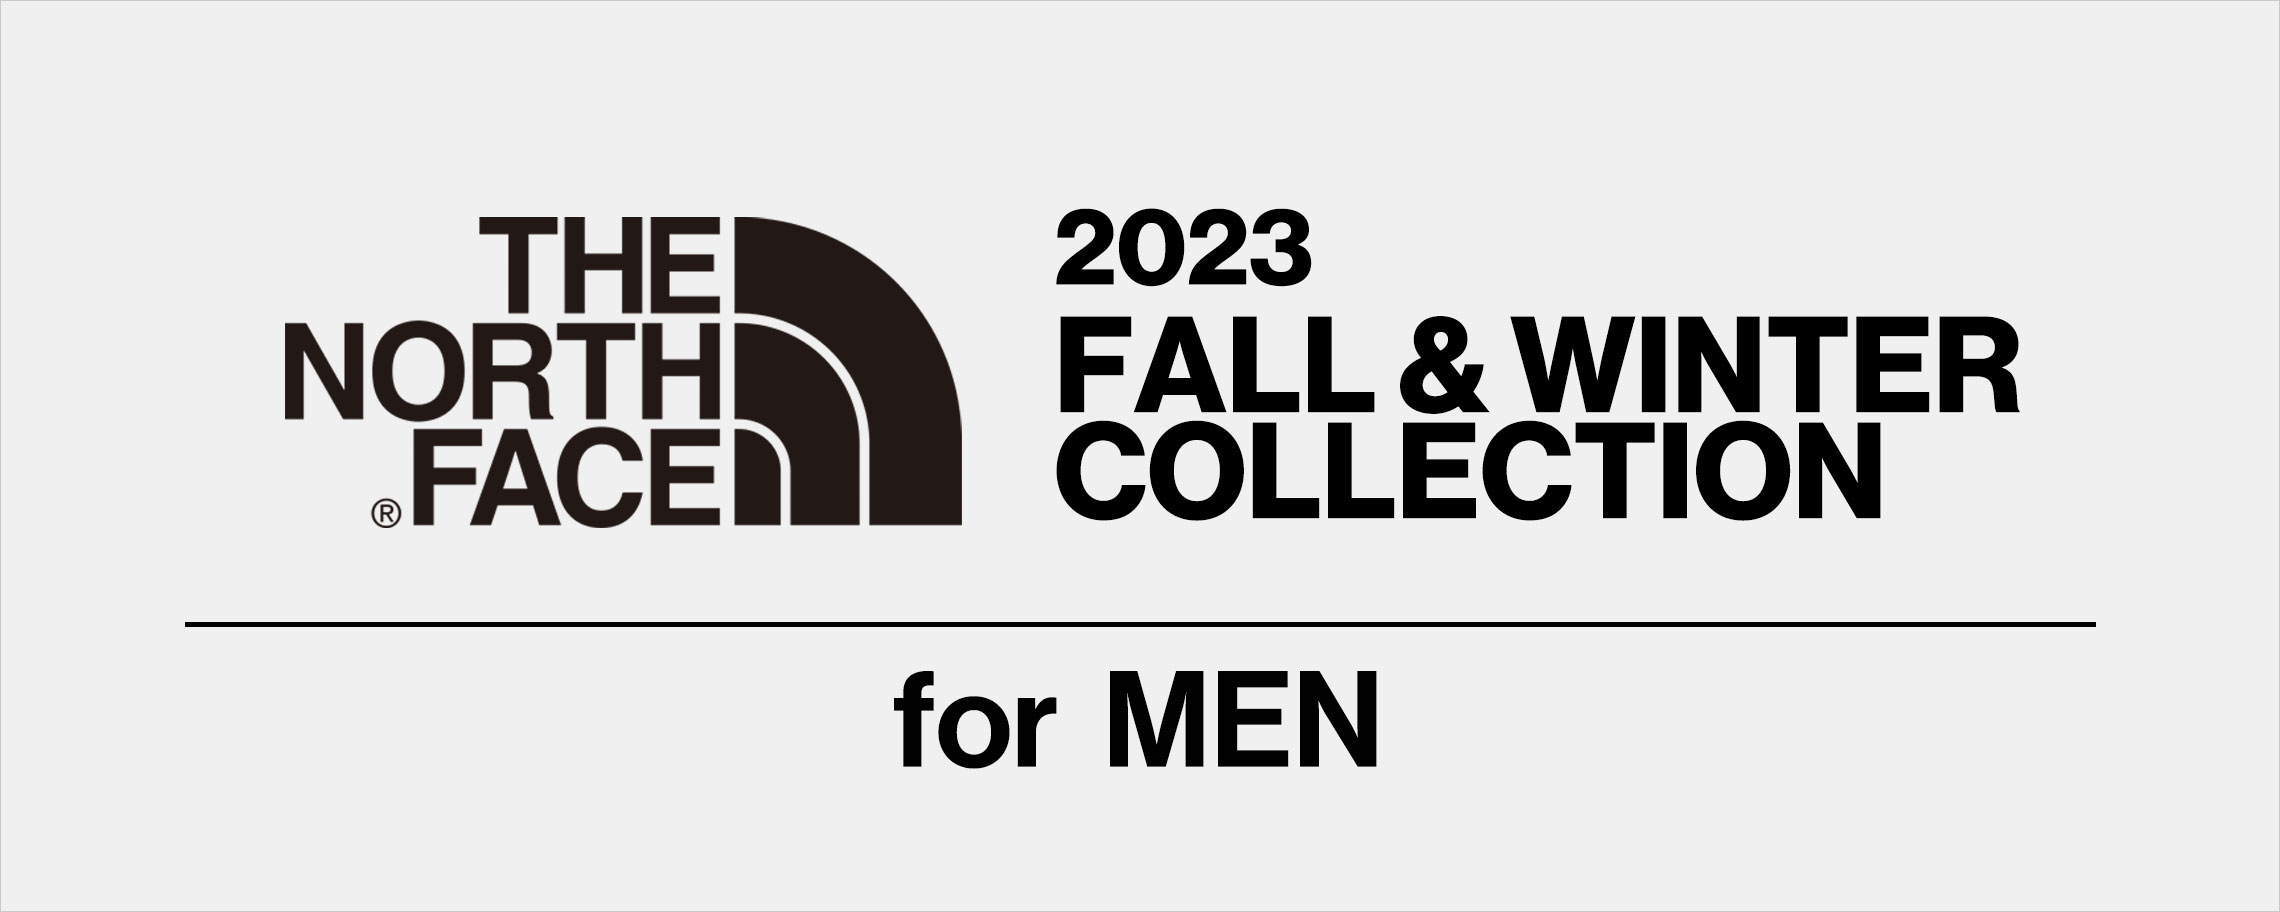 THE NORTH FACE FALL＆WINTER for MEN